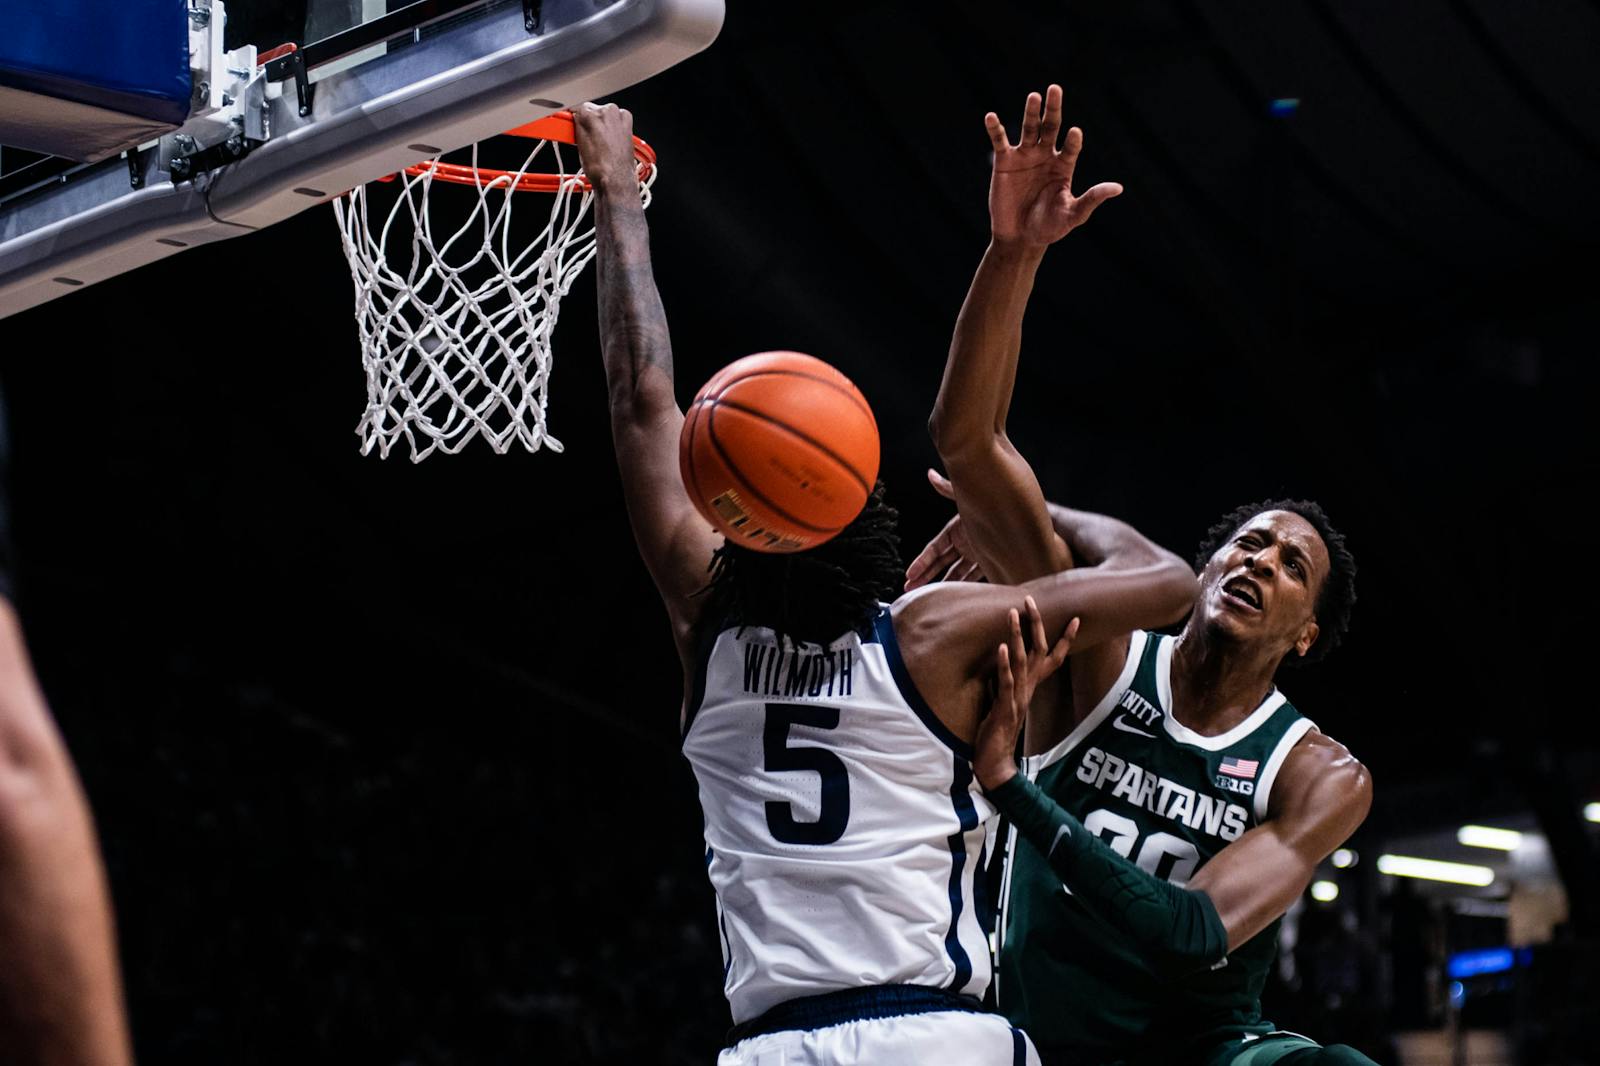 MSU's Tillman Forced To Grow Up Fast On, Off Court